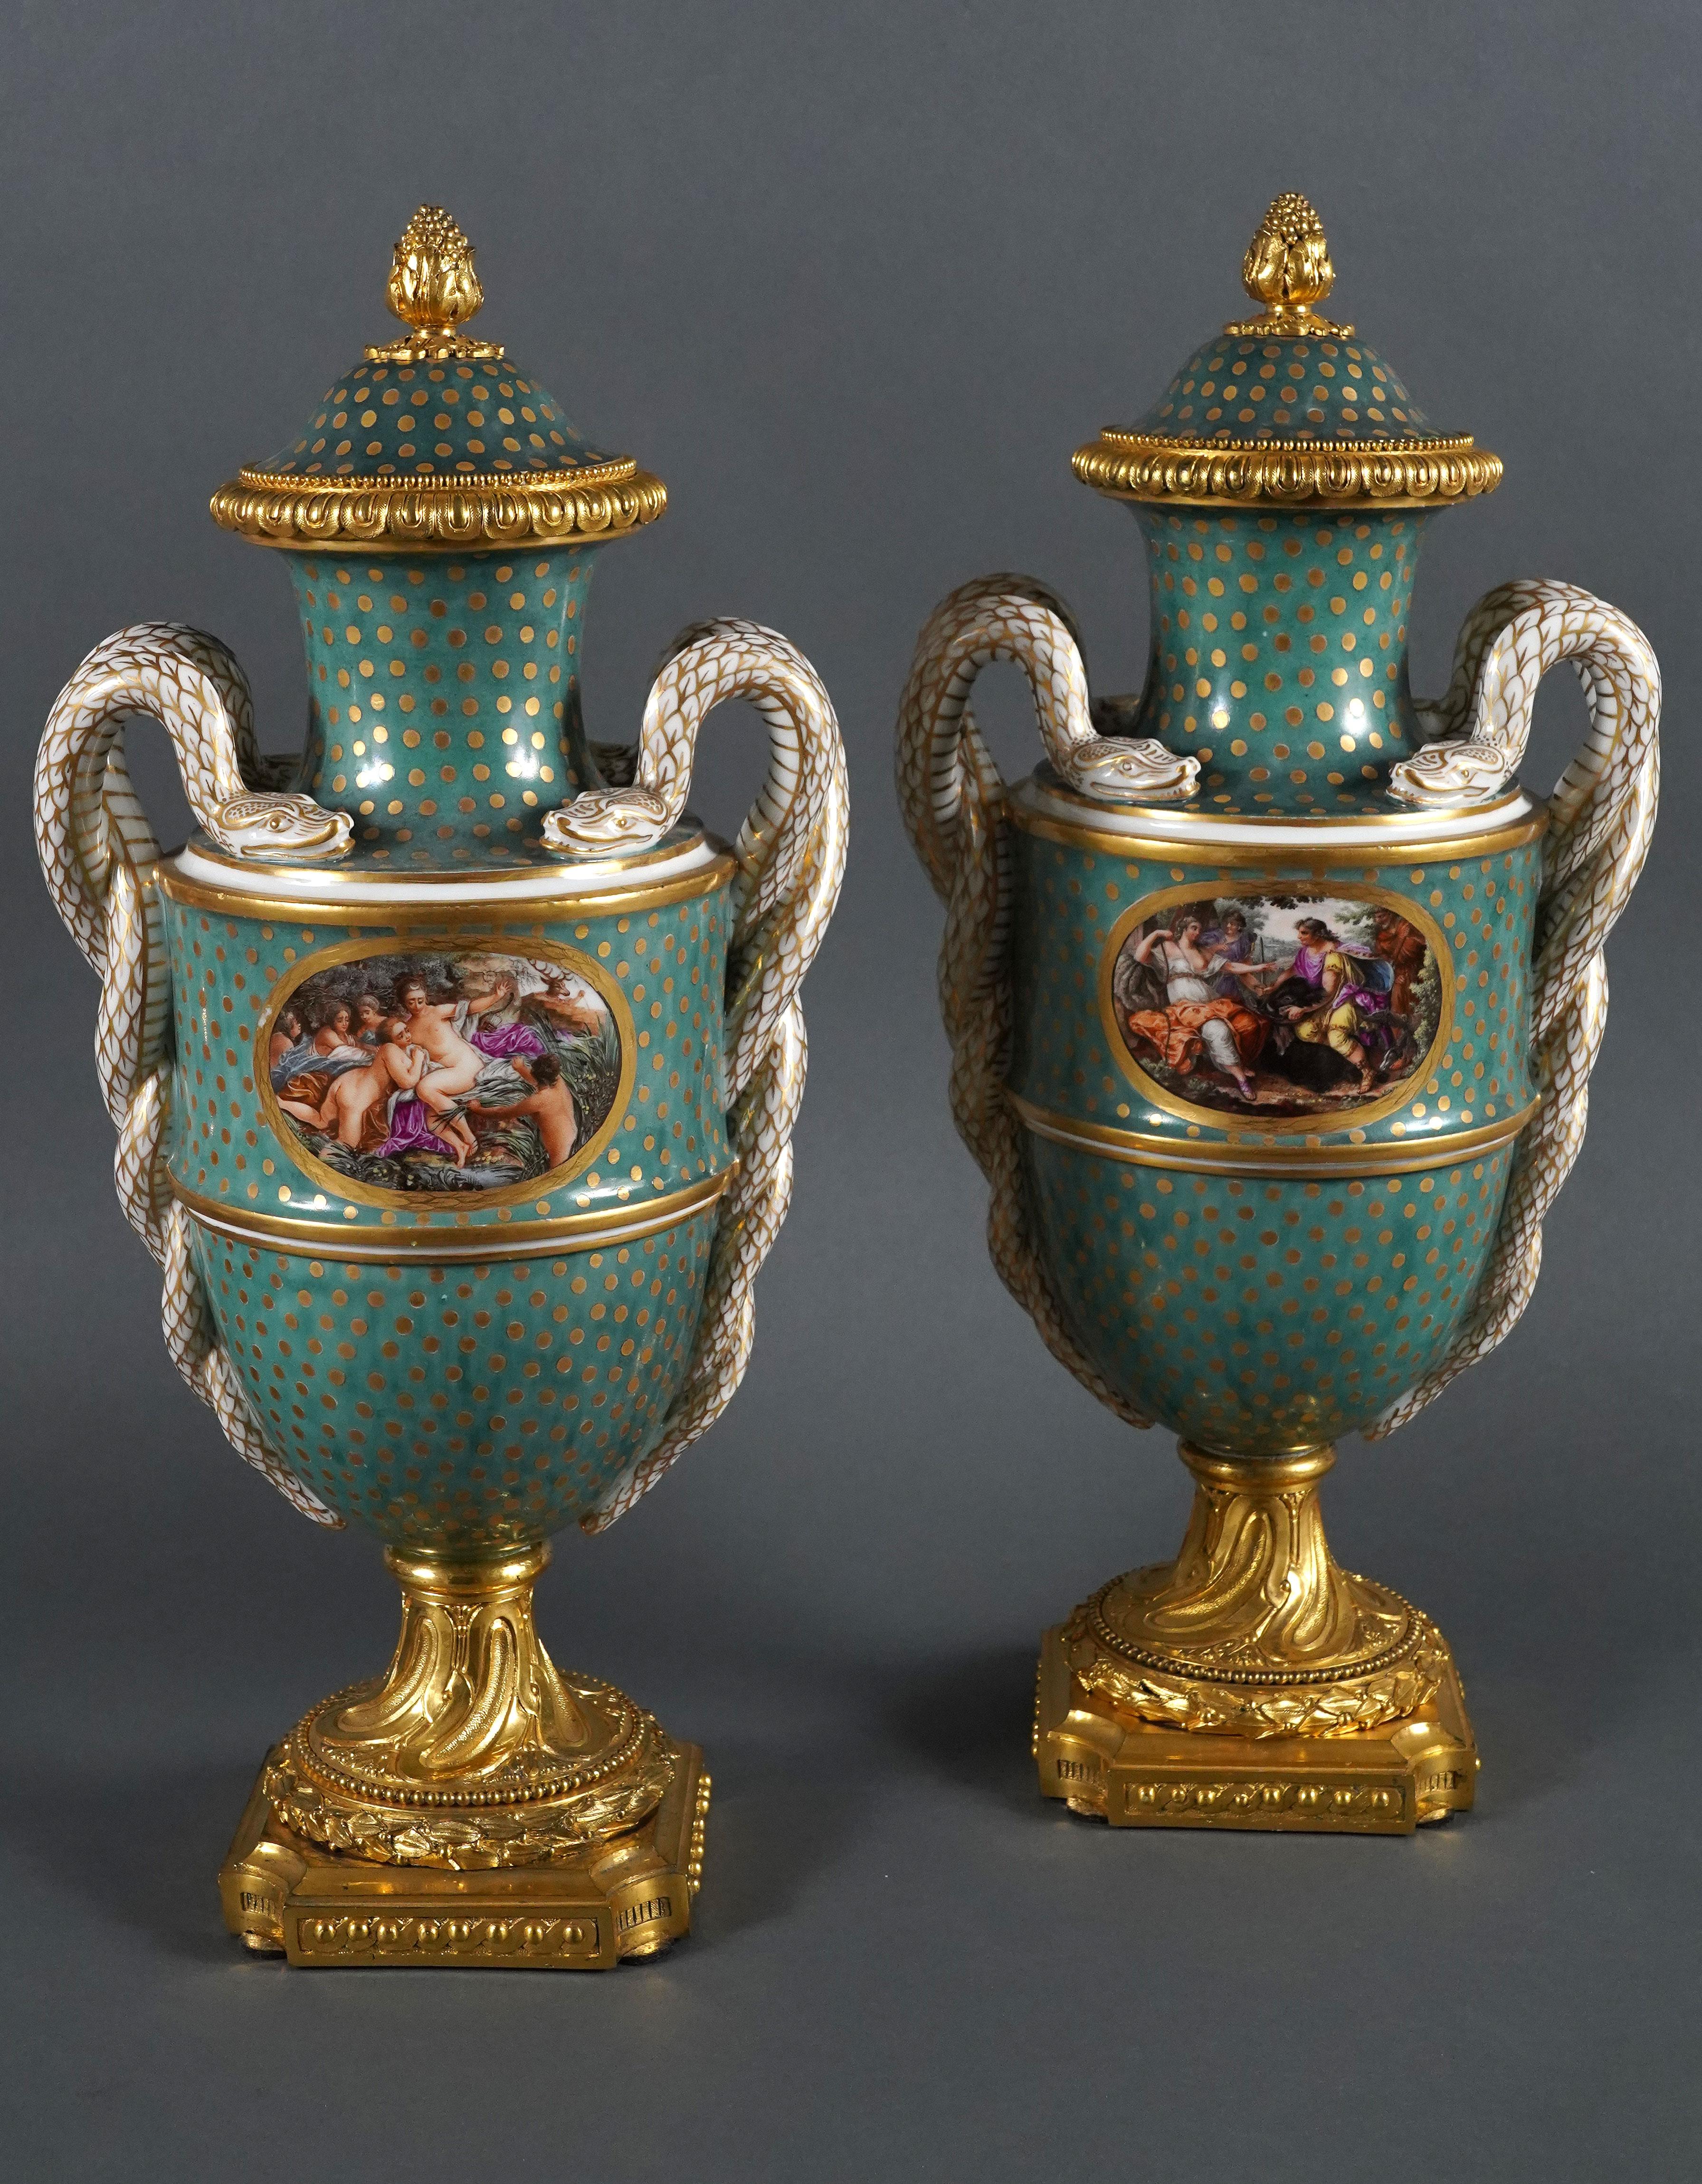 Pair of Louis XVI style baluster shaped covered vases attributed to Samson & Cie, made in porcelain with green background and gold dots, flanked by two applied handles made of white and gold double-coiled snakes. The bodies are finely painted with